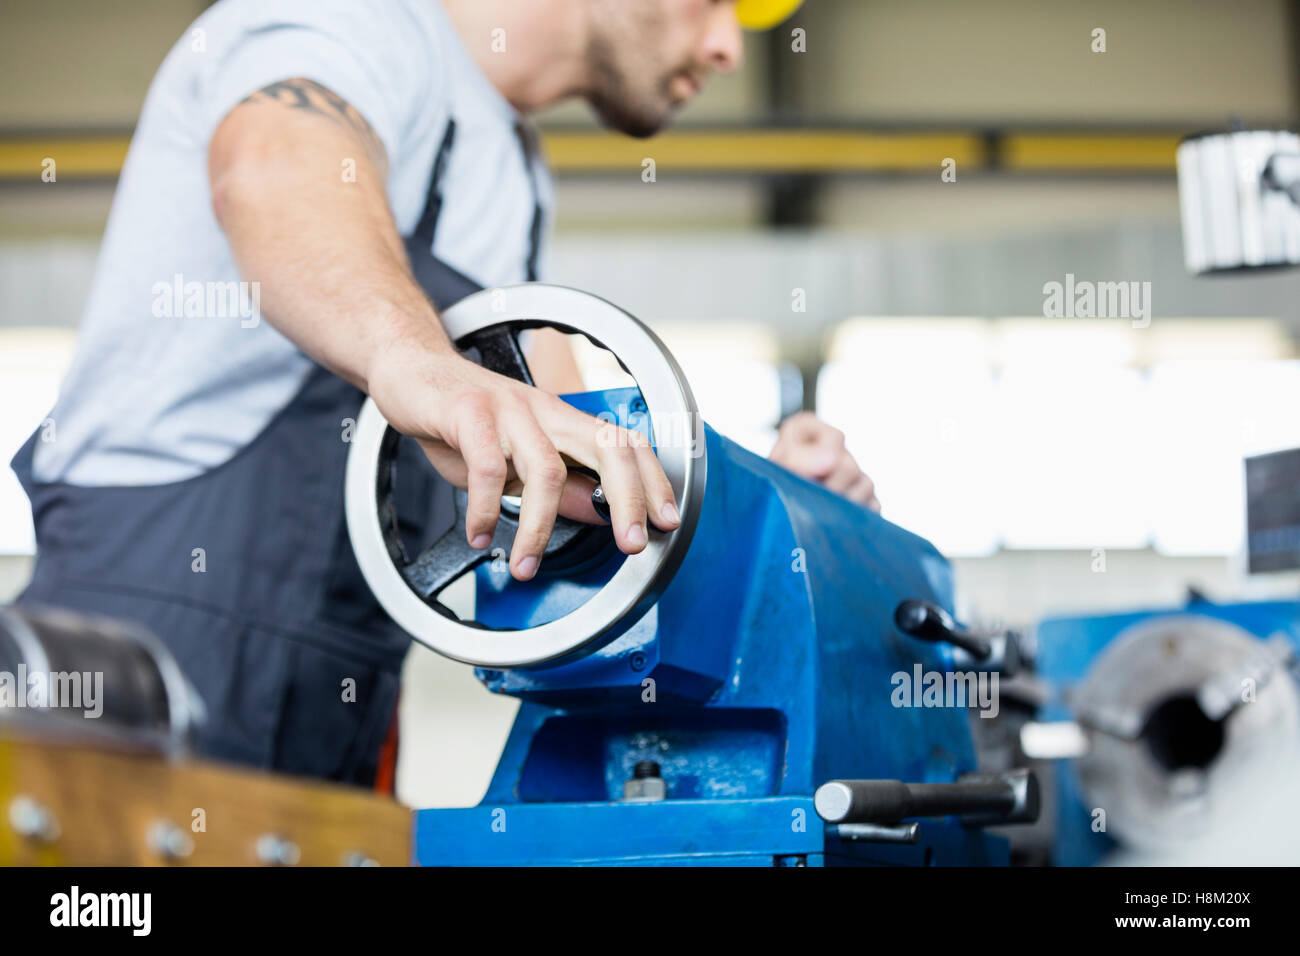 Low angle view of mid adult worker operating machinery in metal industry Stock Photo